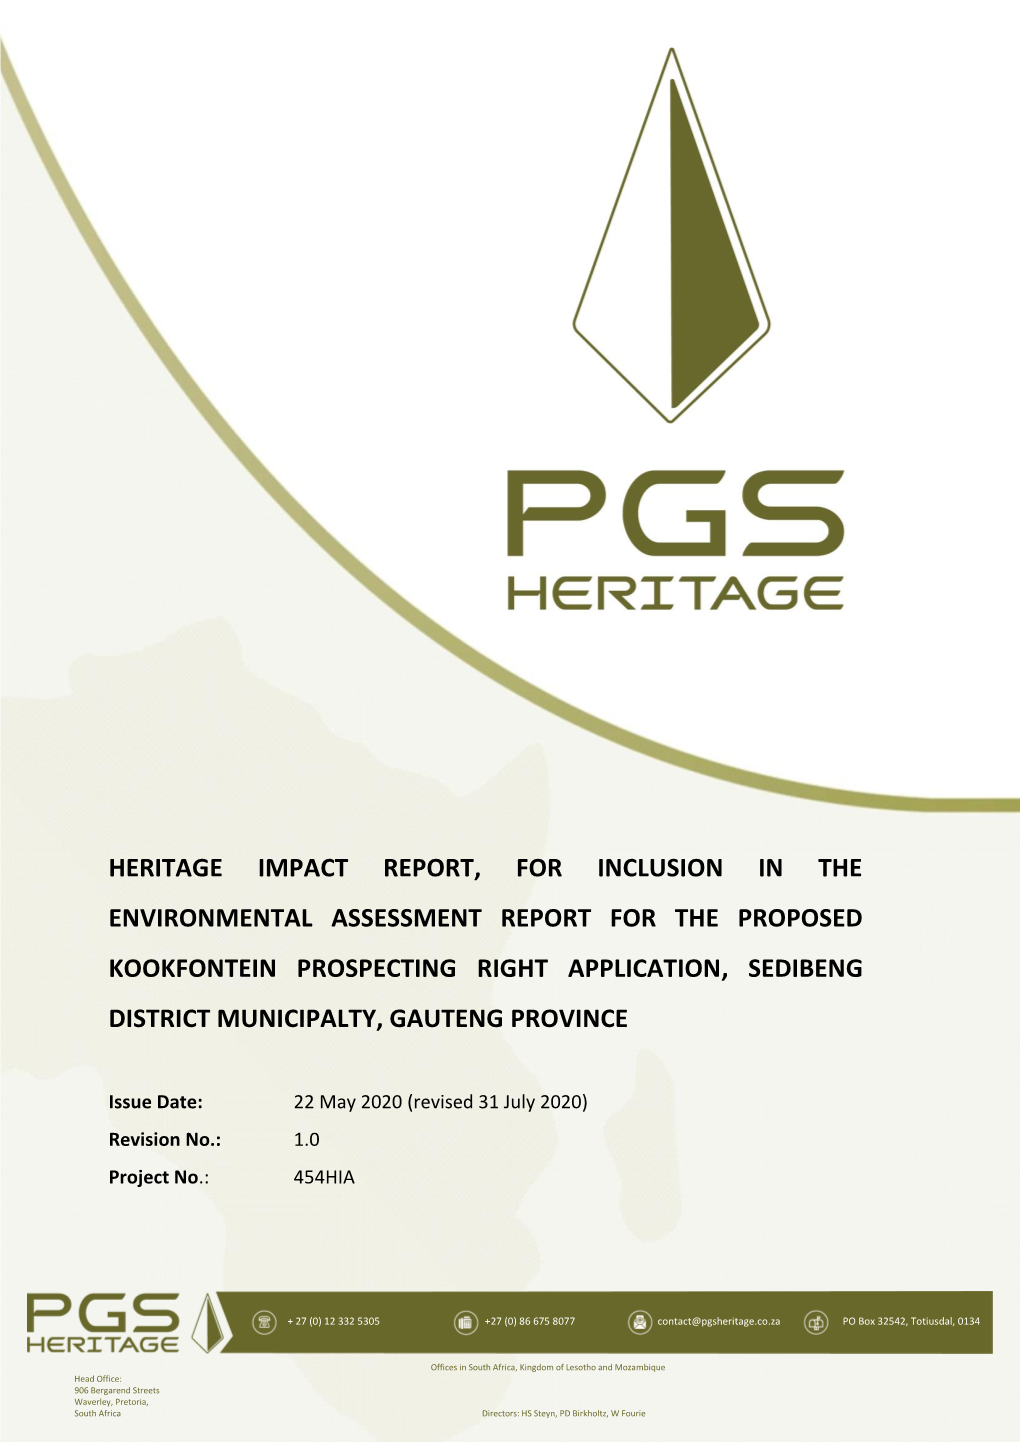 Heritage Impact Report, for Inclusion in The